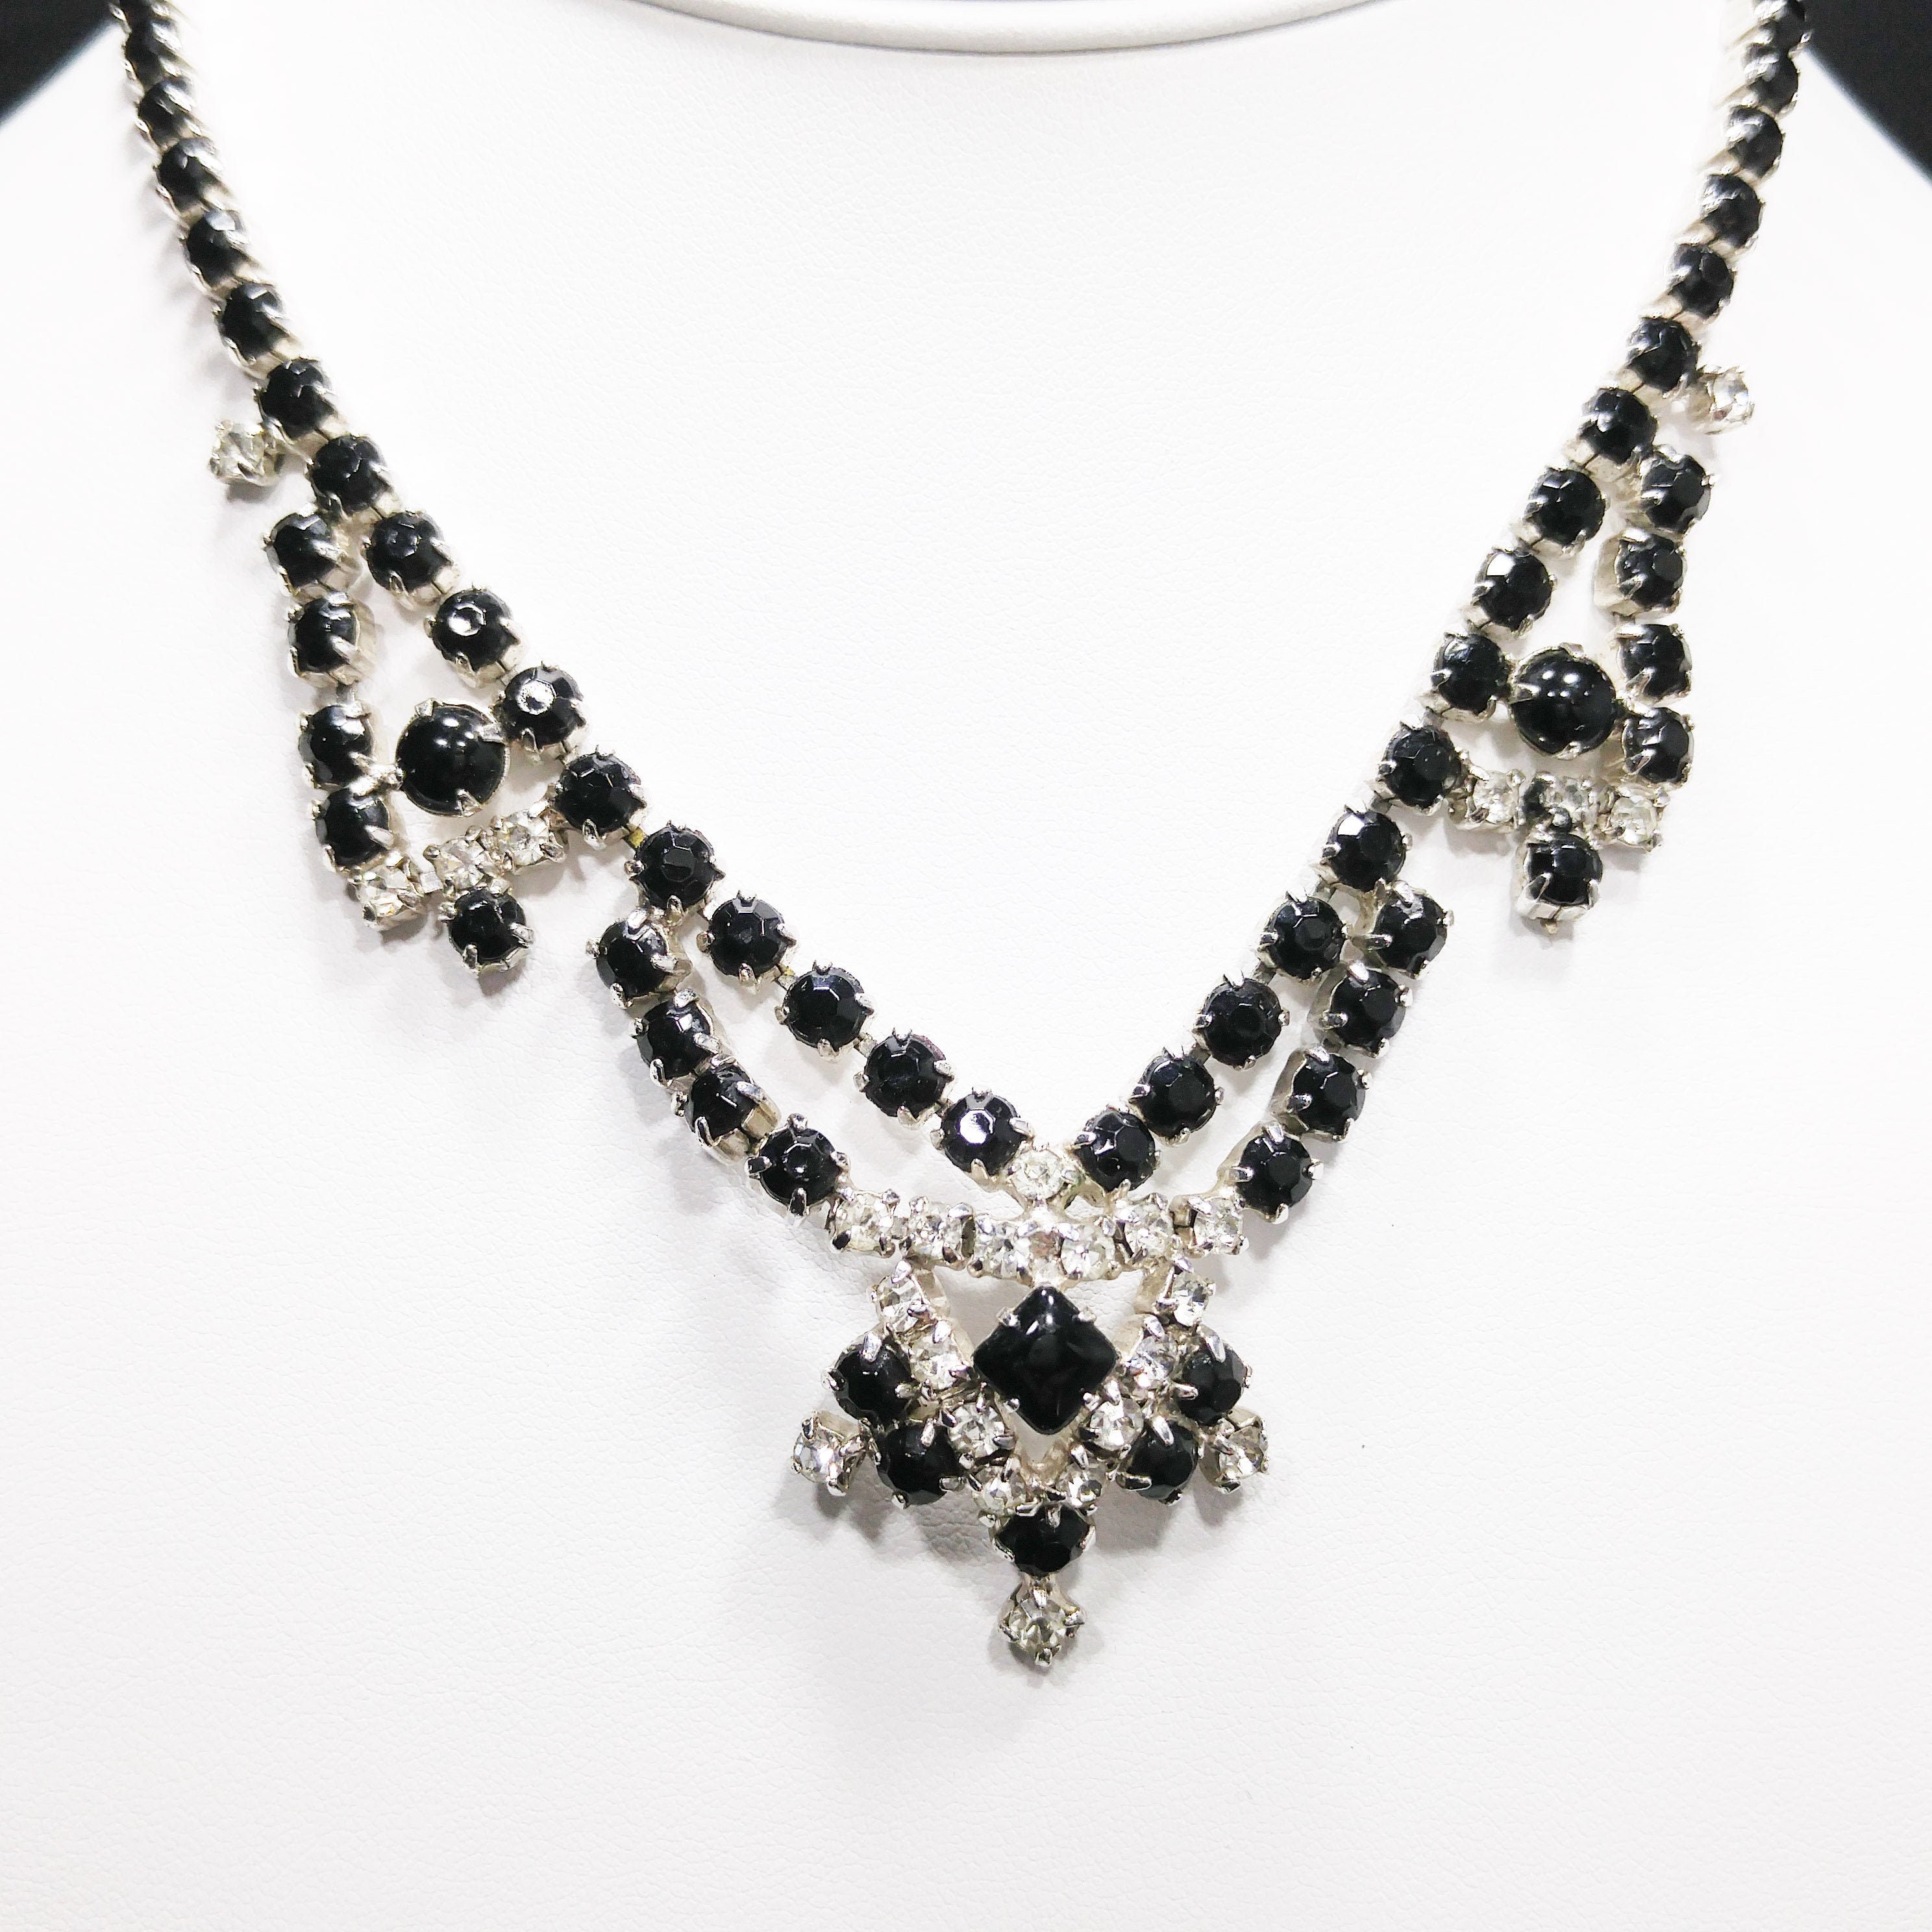 Lot - Miriam Haskell choker necklace with faceted black glass beads and  rhinestone rondelles with round central floral pendant and large c...